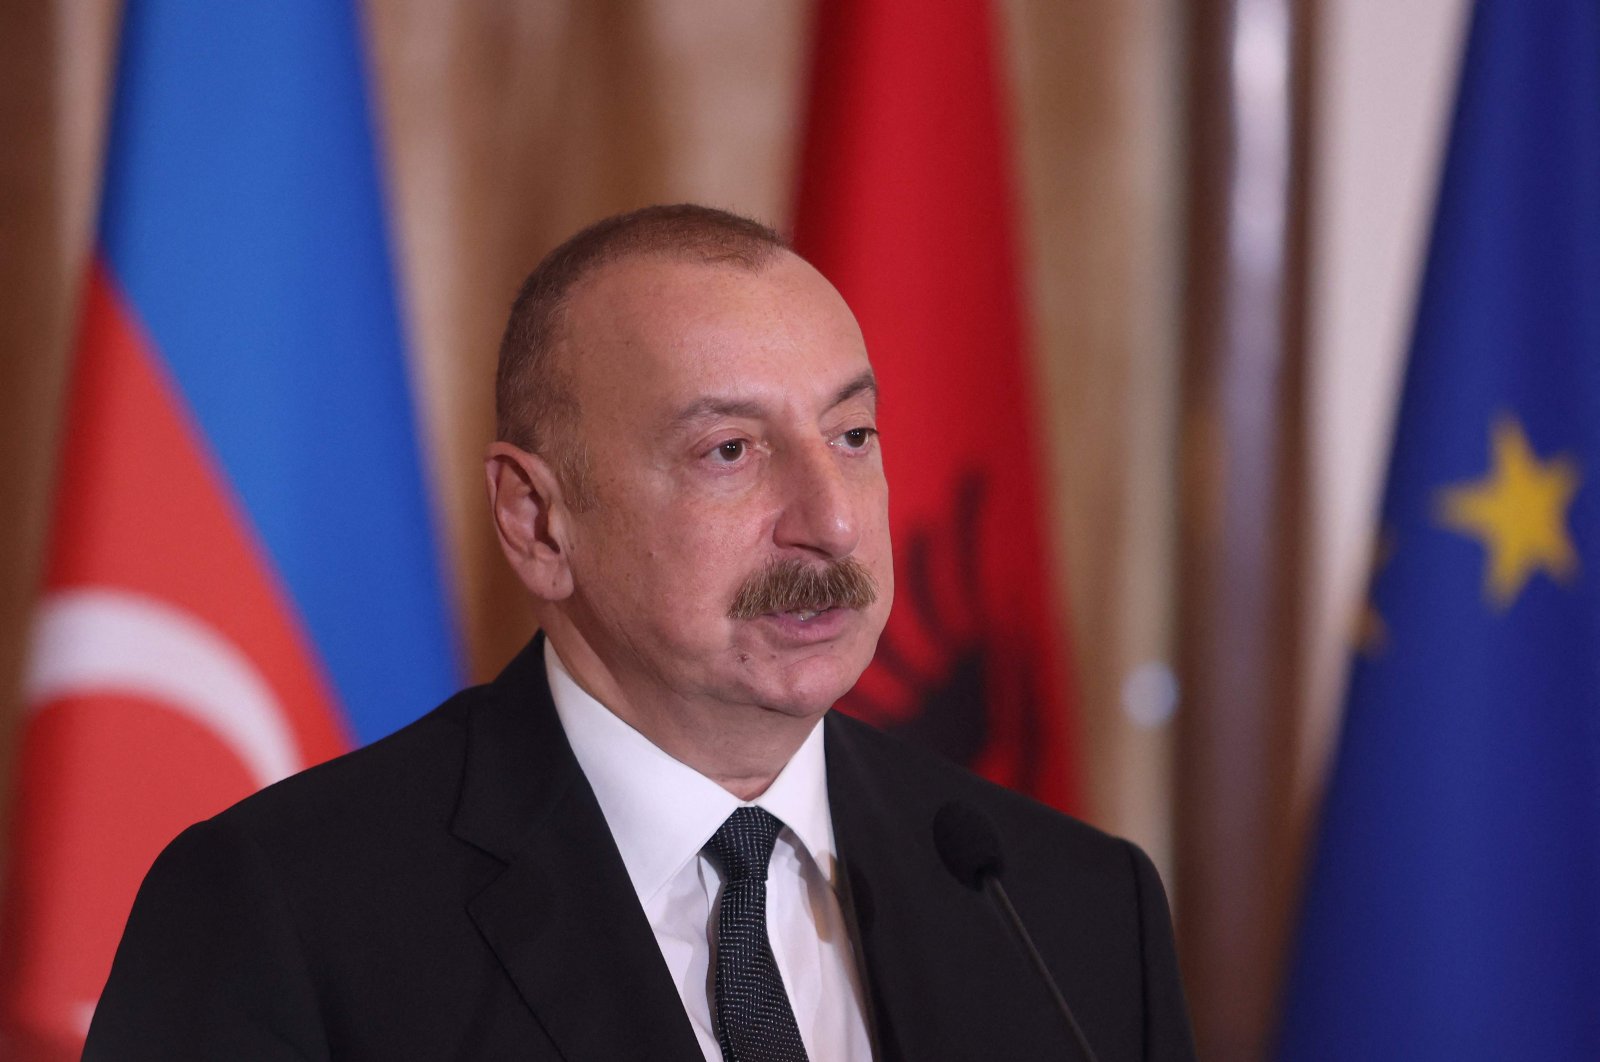  Azerbaijan&#039;s President Ilham Aliyev attends a news conference as part of his official visit to Albania at the Palace of Brigades in Tirana on Nov. 15, 2022. (AFP File Photo)